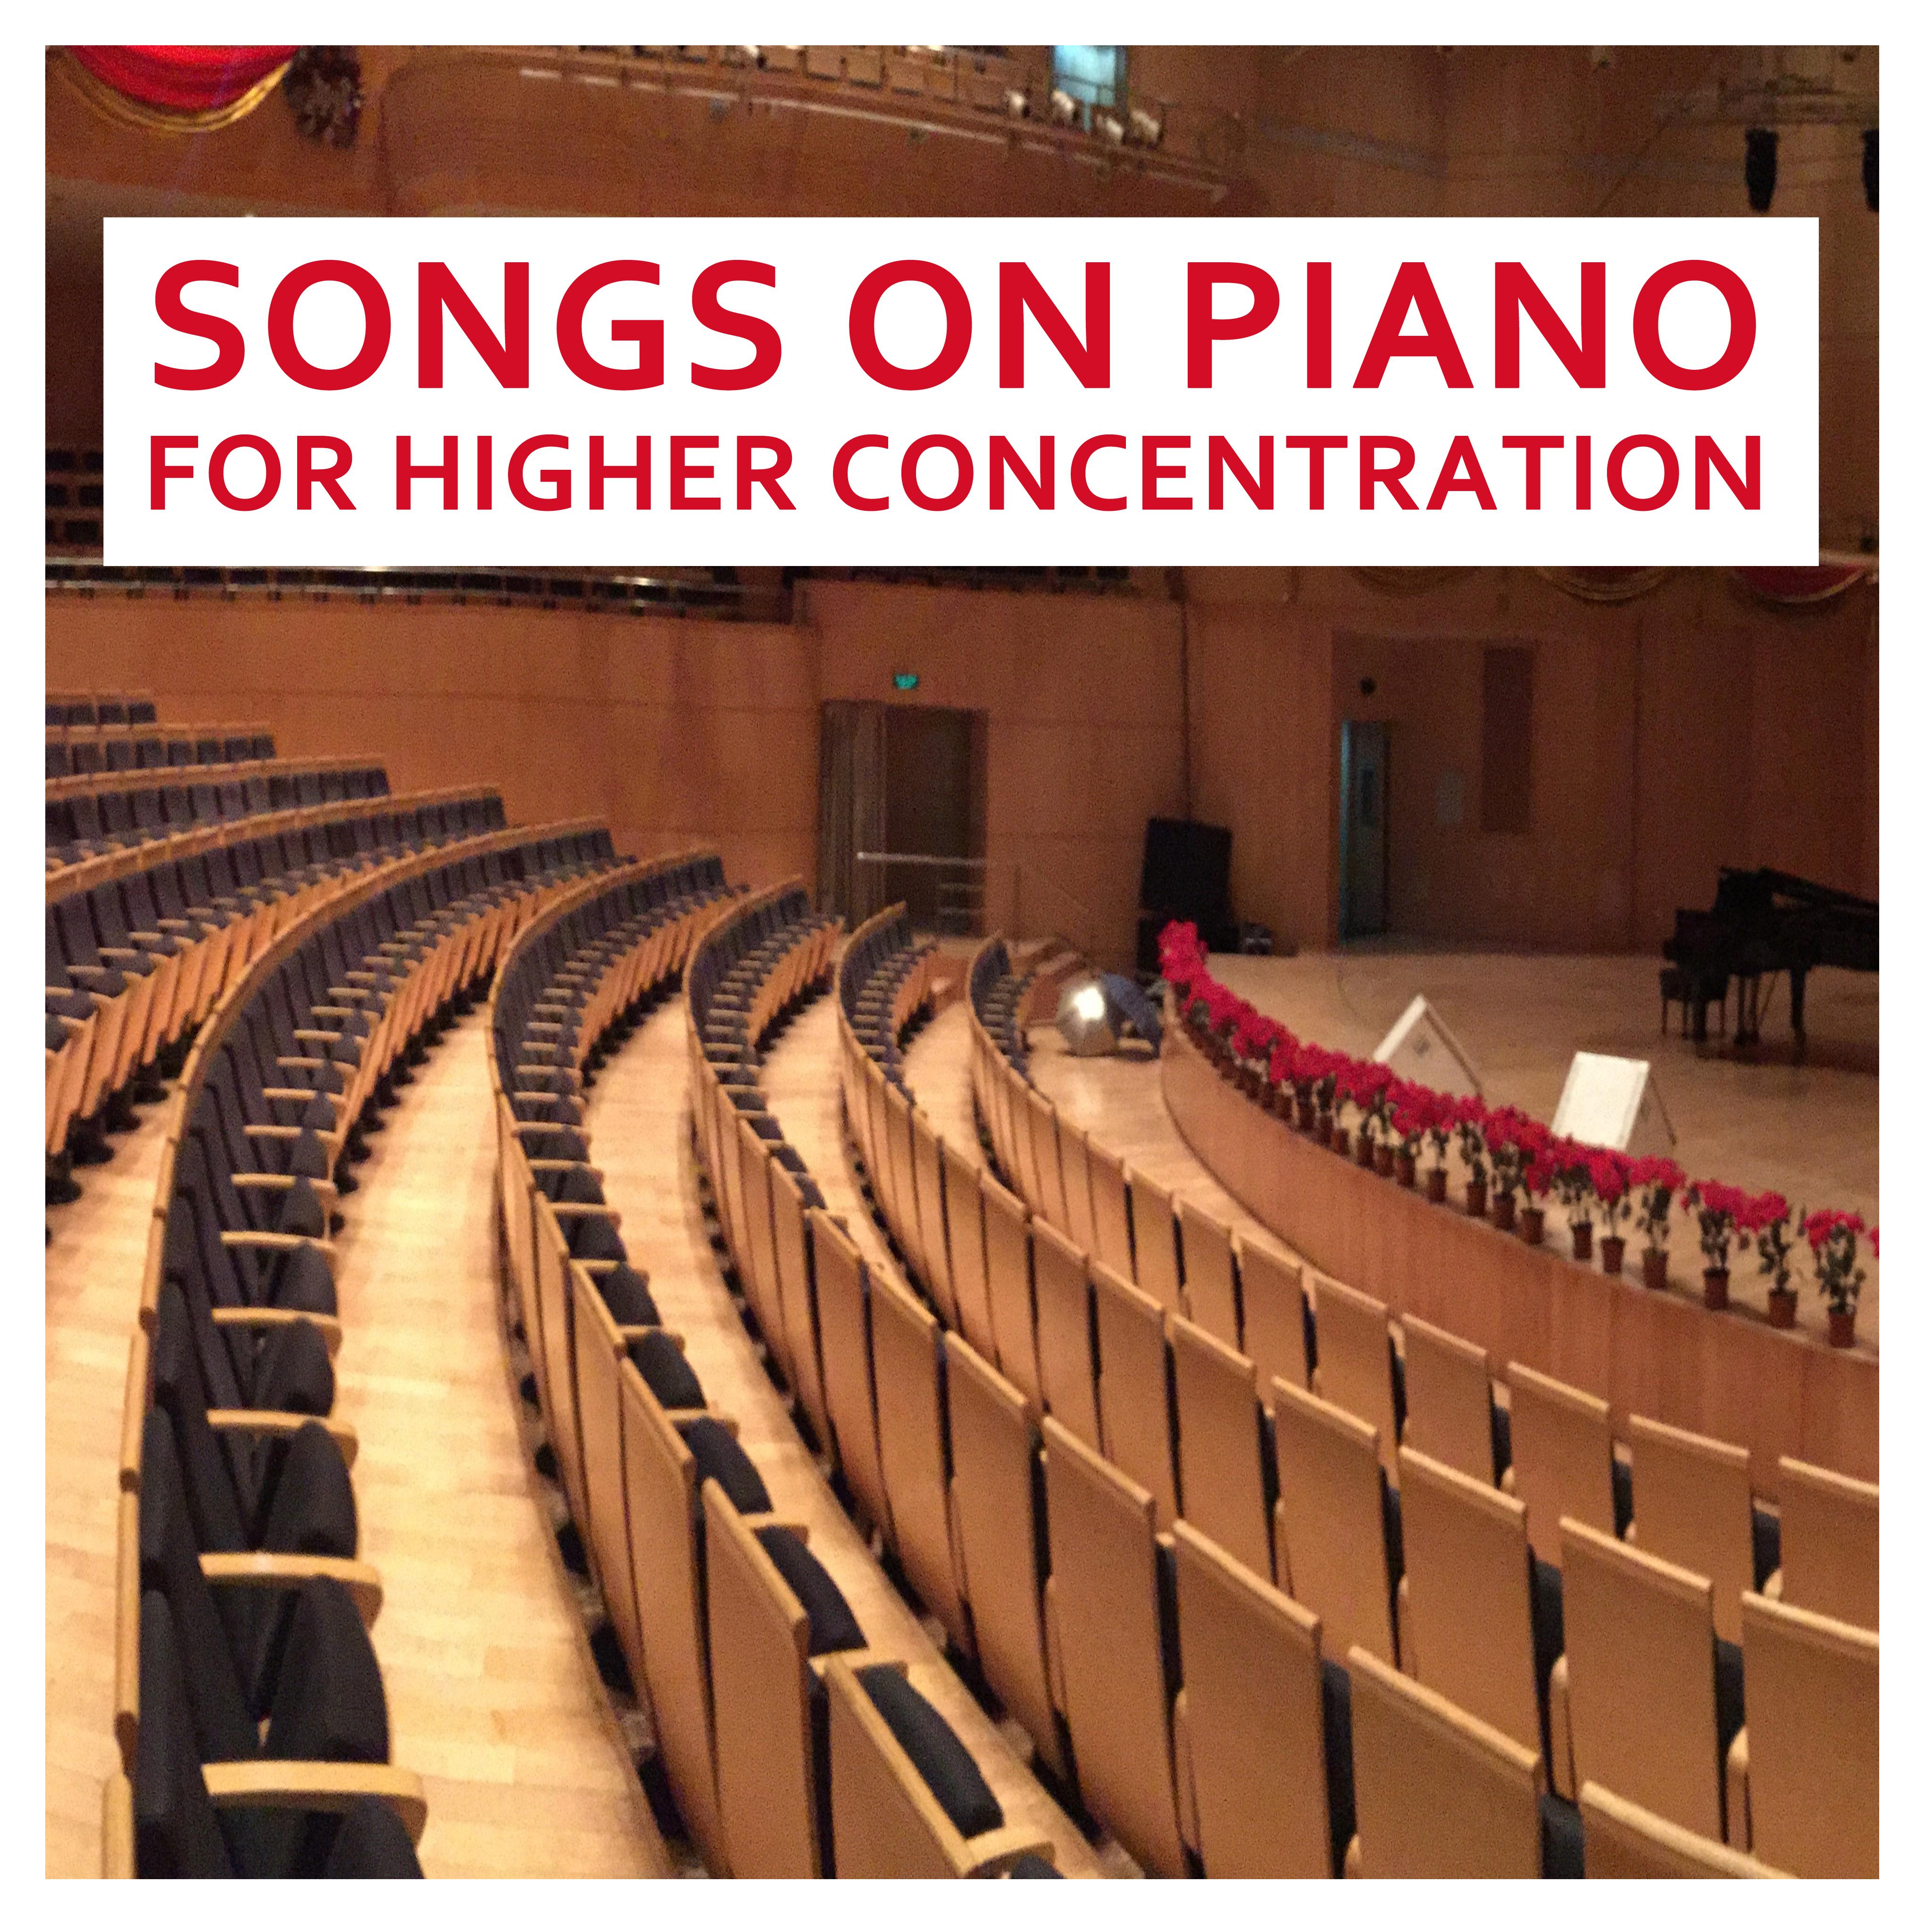 16 Songs on Piano for Higher Concentration